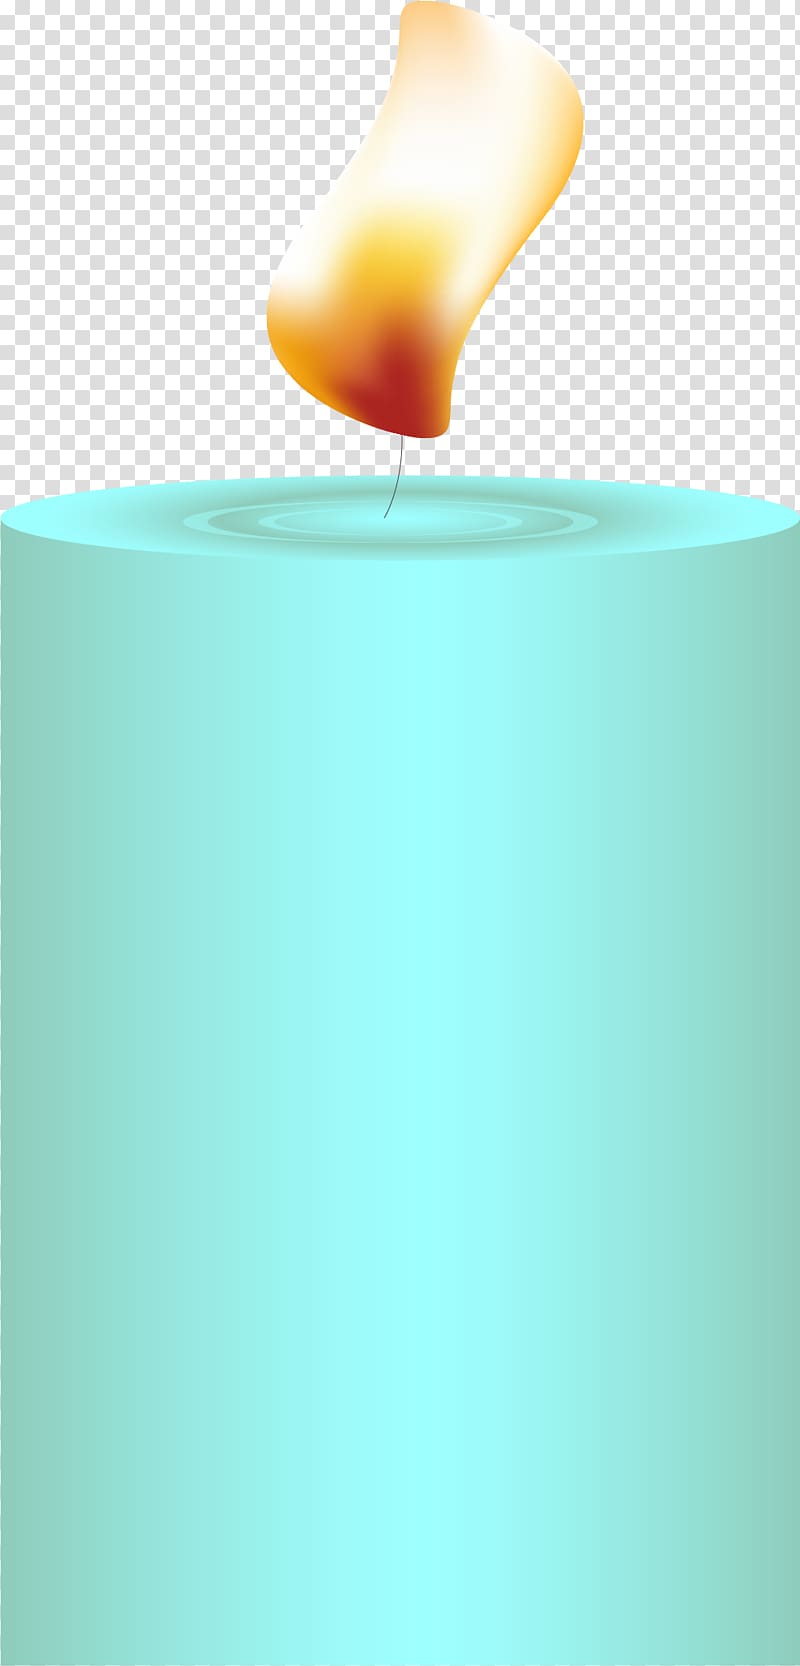 Computer , Sky blue candlelight transparent background PNG clipart